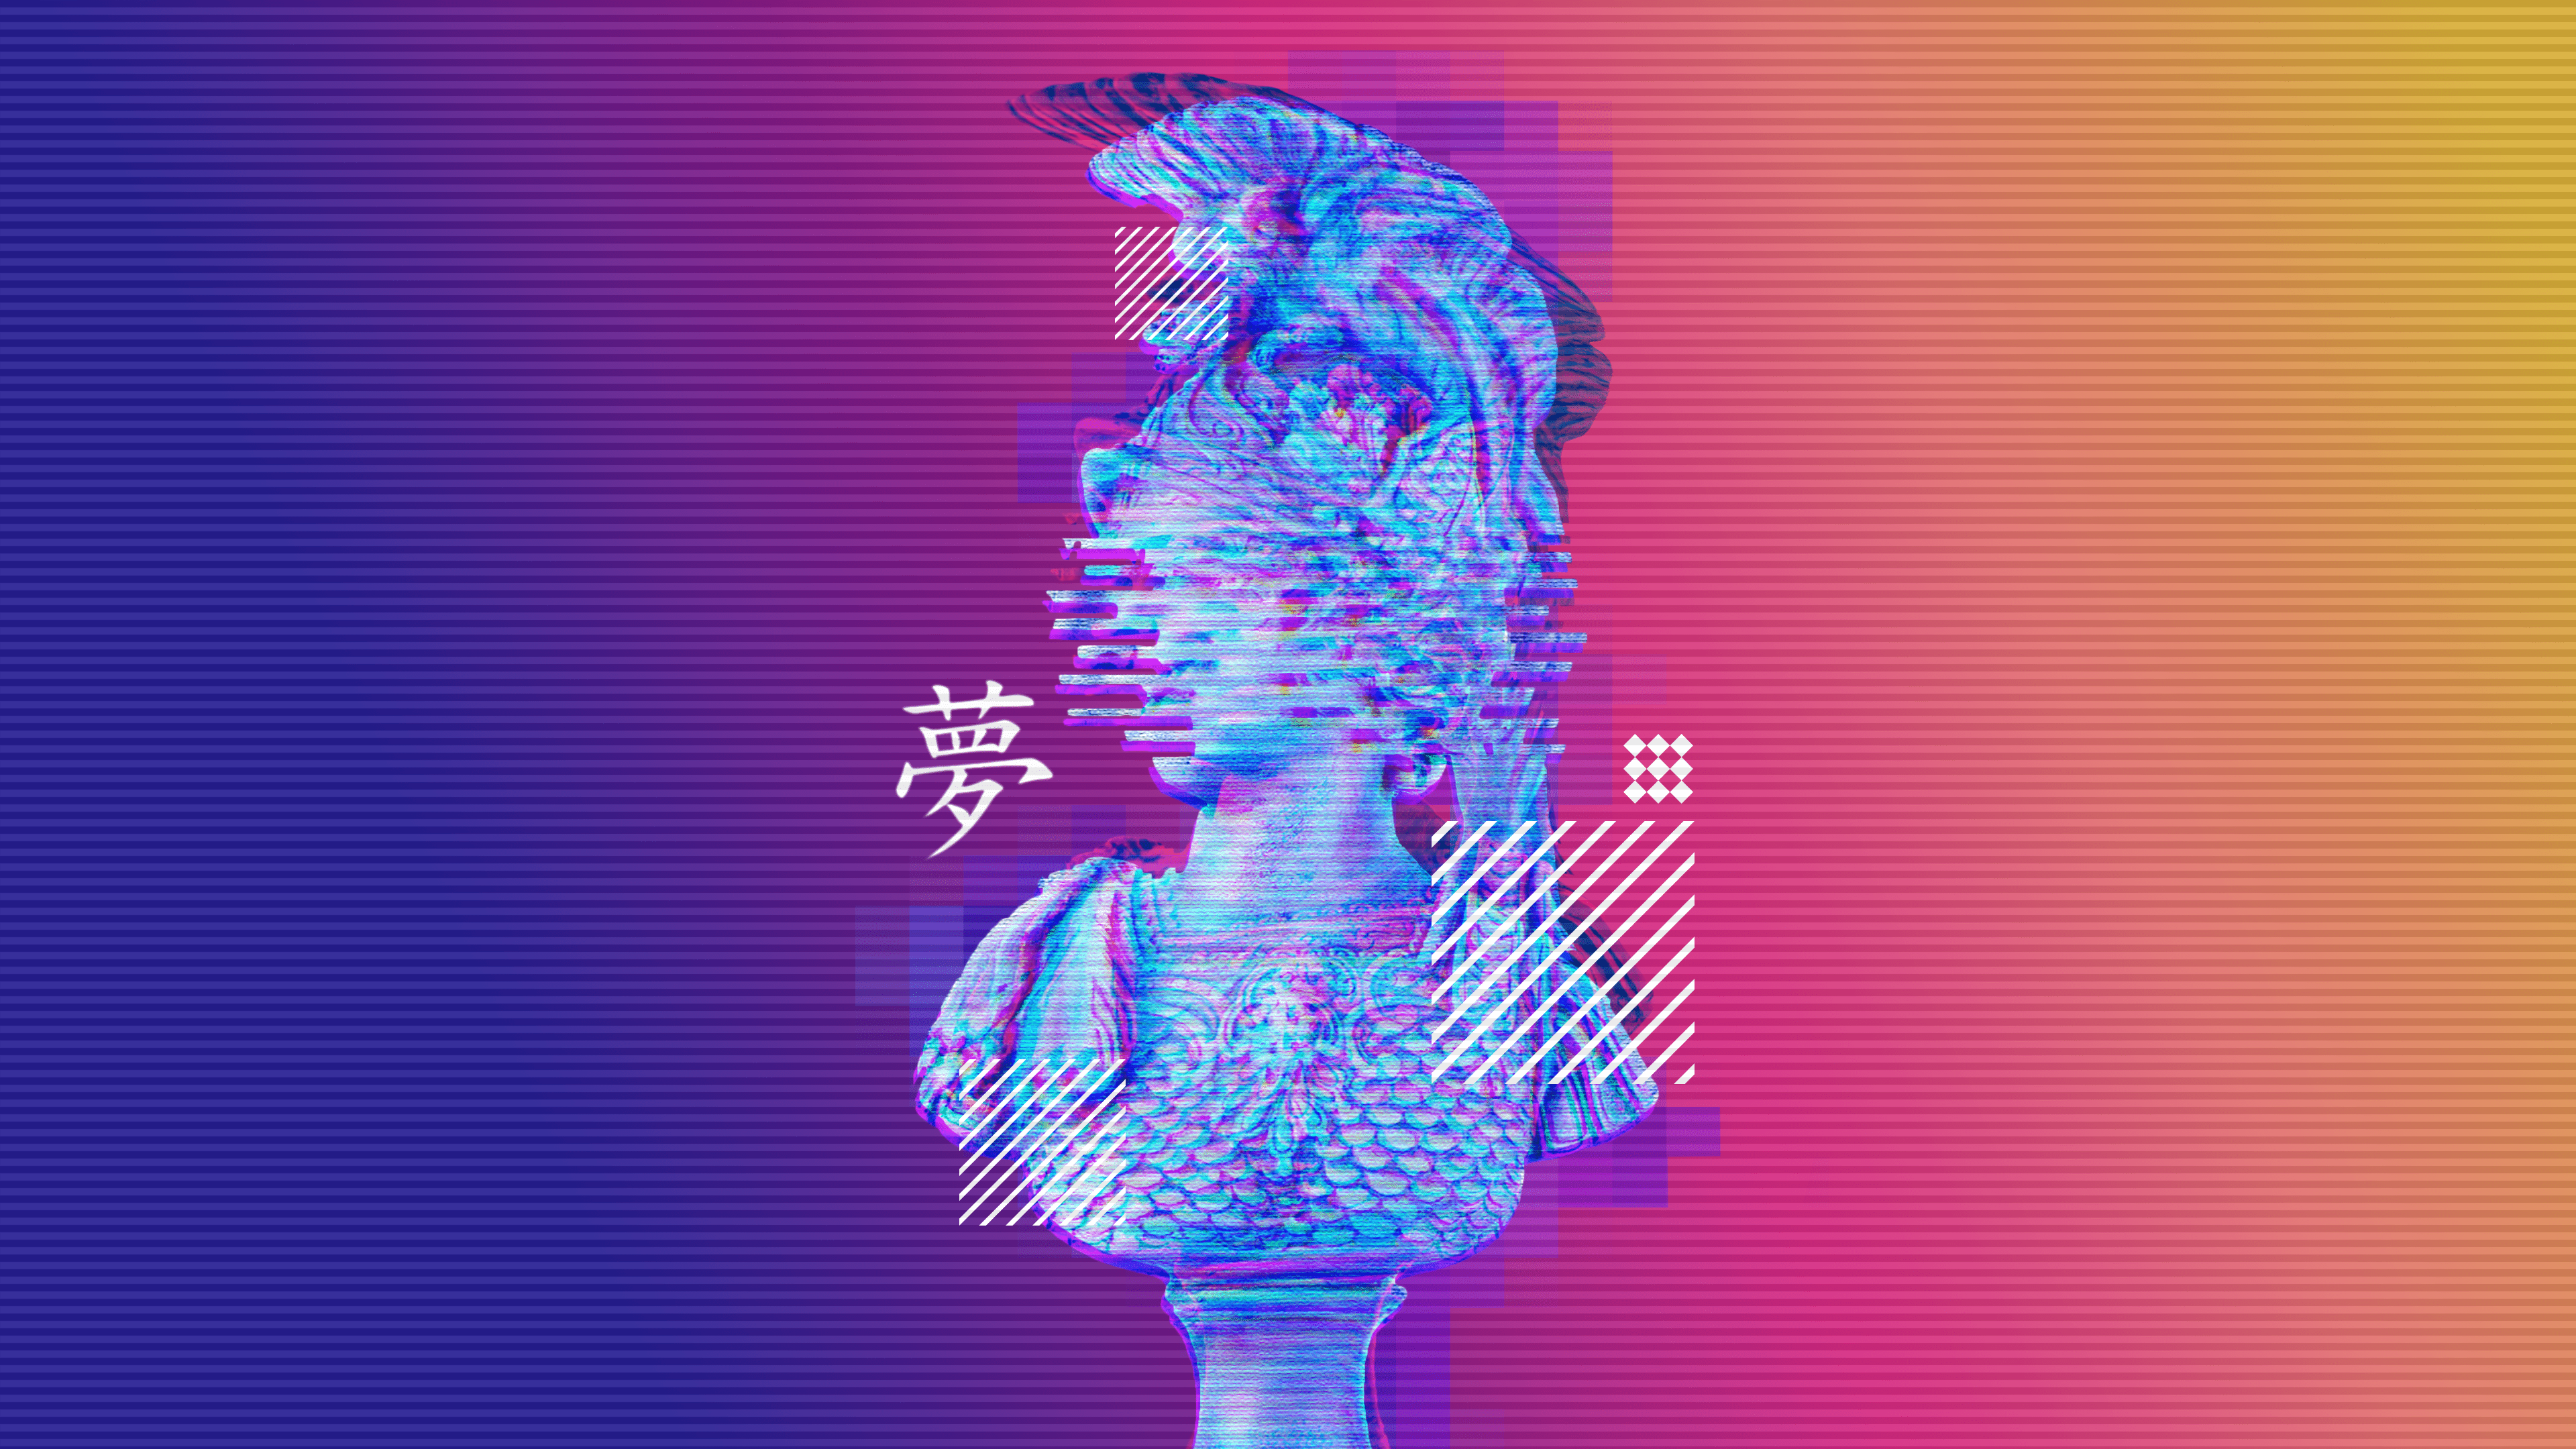 A distorted bust of a man with a helmet on, in front of a gradient background of blue and pink. - Synthwave